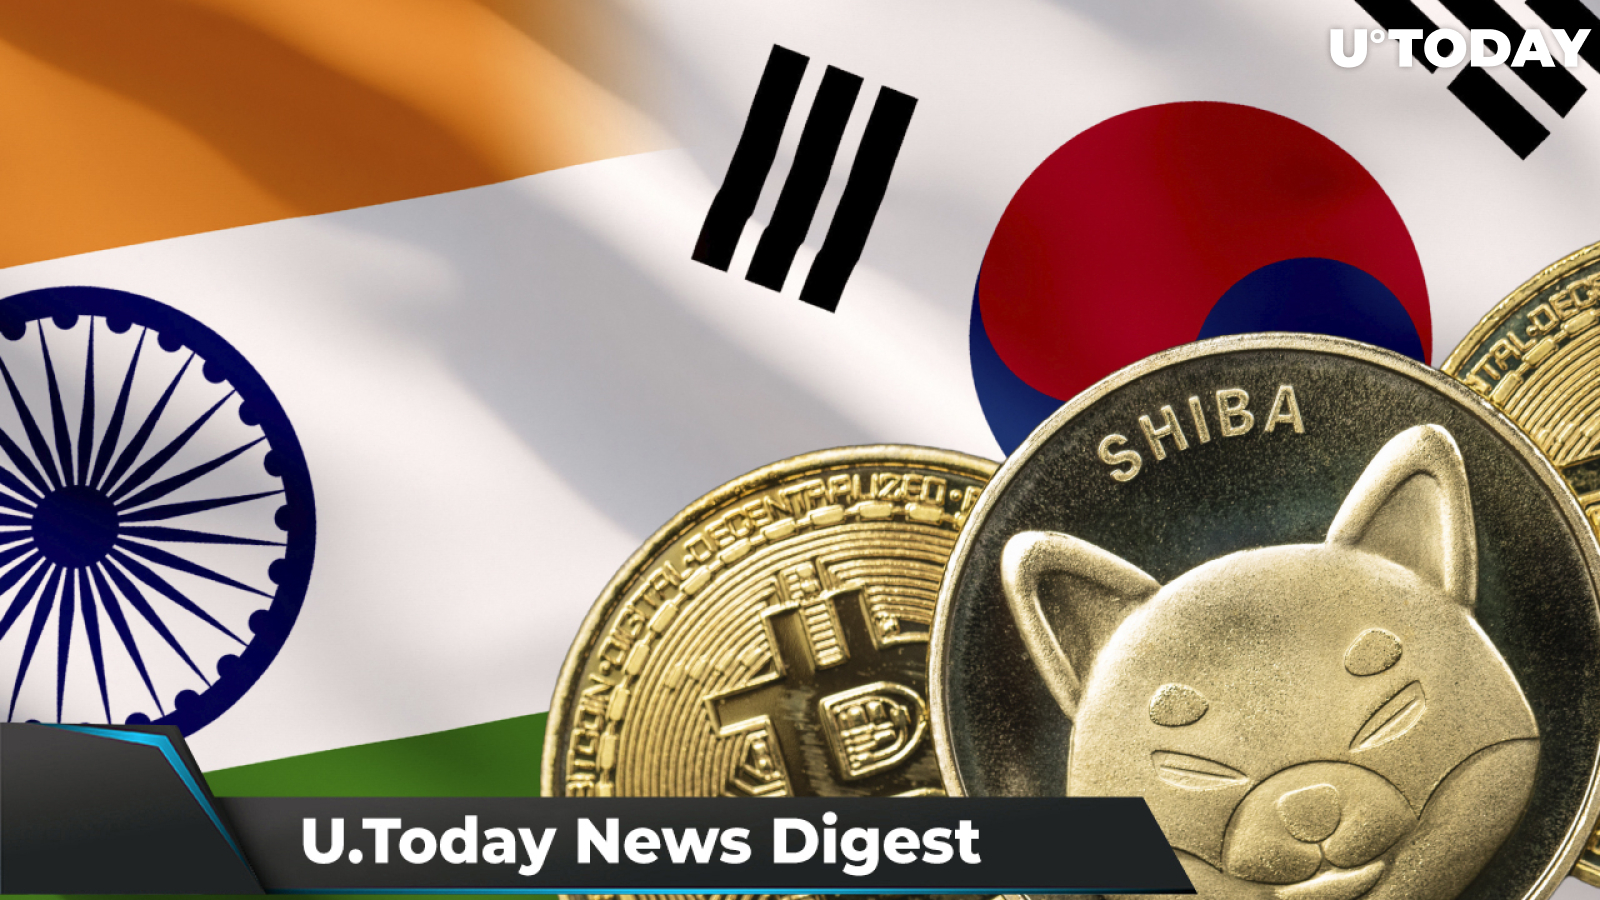 SHIB Listed by South Korean Exchange, India Slightly “Unbans” Crypto, Musk Takes Aim at Centralized Exchanges: Crypto News Digest by U.Today